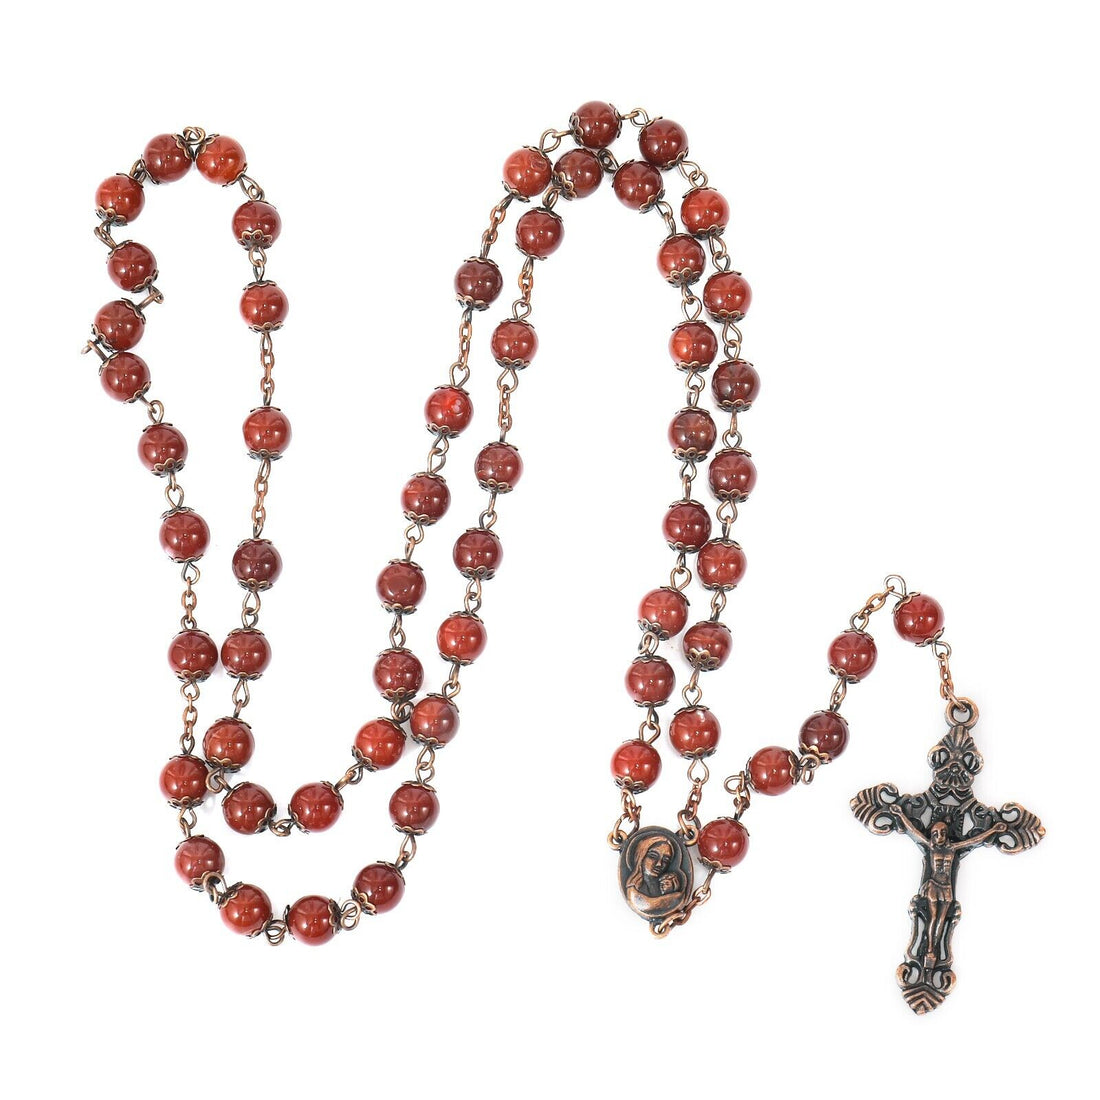 Elysian Gift Shop Catholic Rose Petal Red Rosary Necklace with Rose Bud  Silver Metal Rosary Box- Includes Rose Scented 6mm Red wood Rosary Beads  and